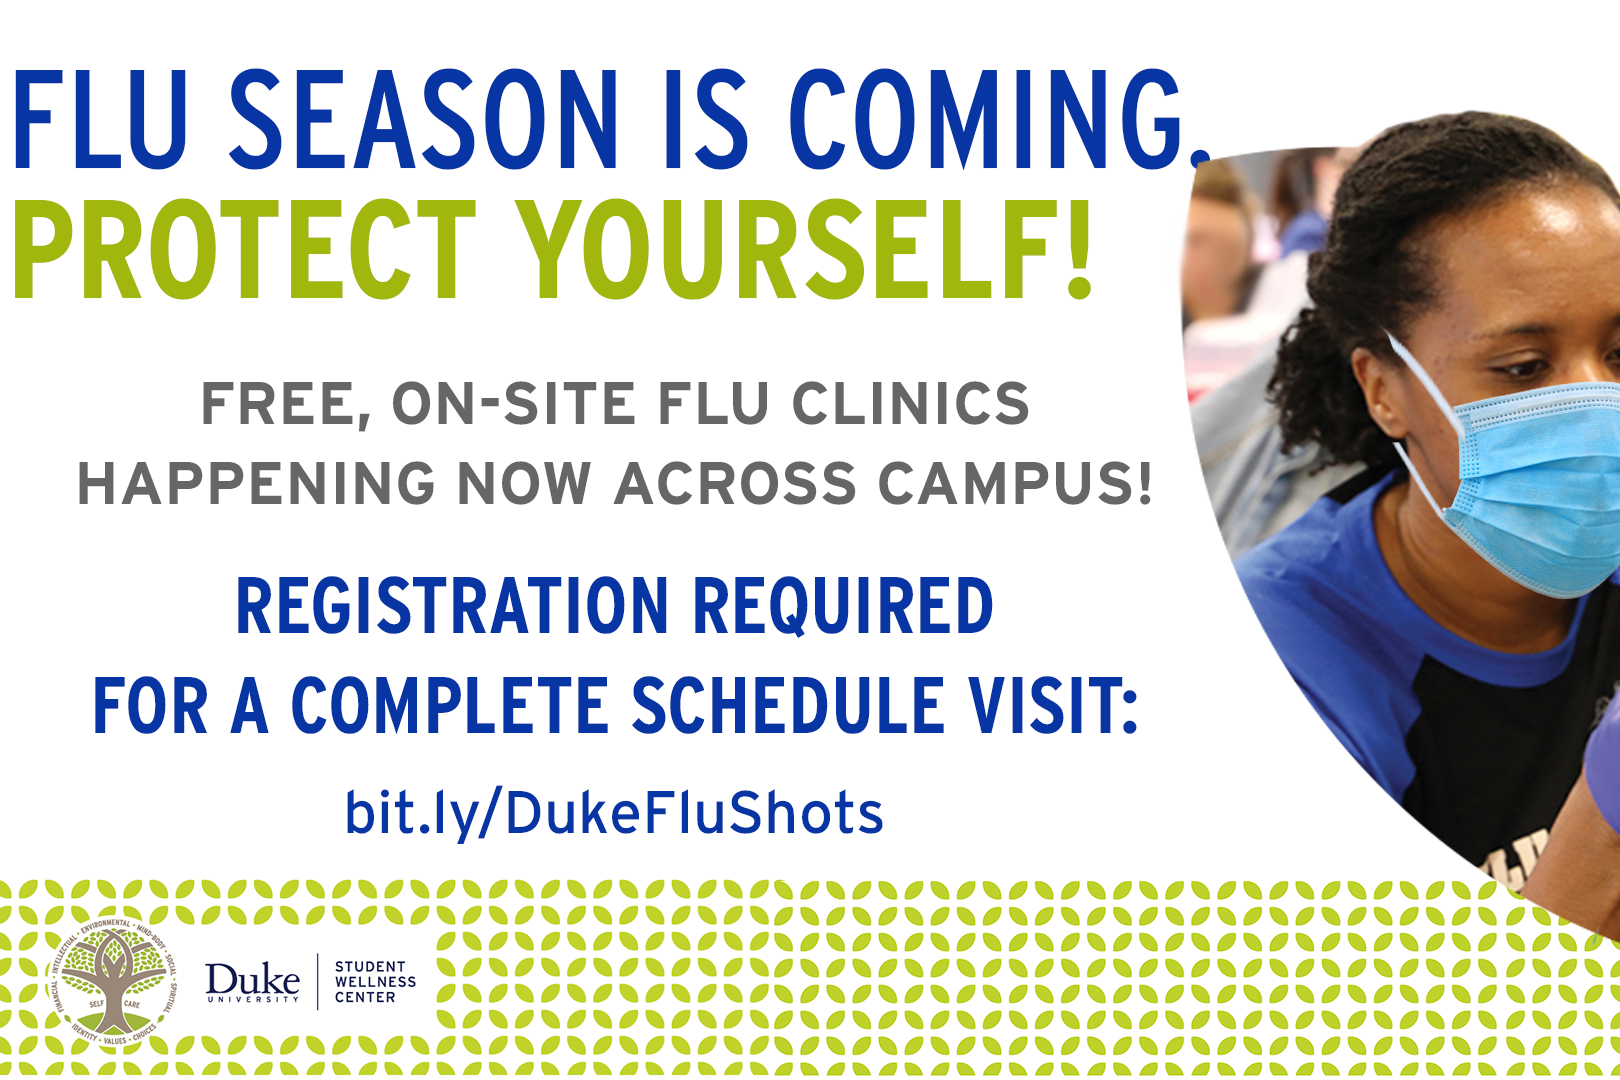 Flyer with woman with a mask on. Information reads: Flu Season is coming protect yourself! Free On Site Flu Clinics Happening Now Across Campus! Registration is required fro a complete schedule visit: bit.ly/DukeFluShots